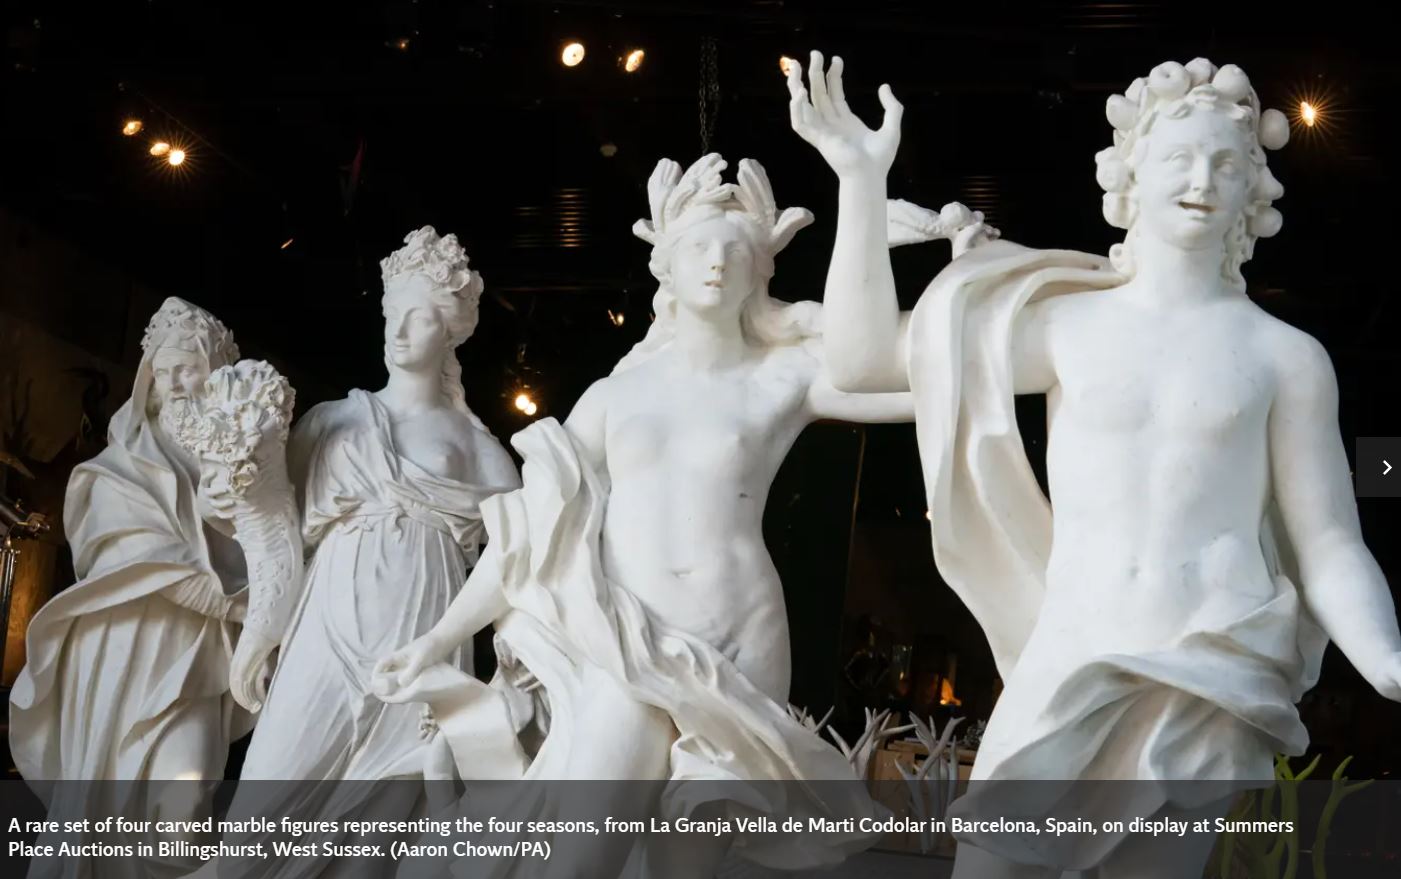 'Remarkable' Four Seasons marble statues